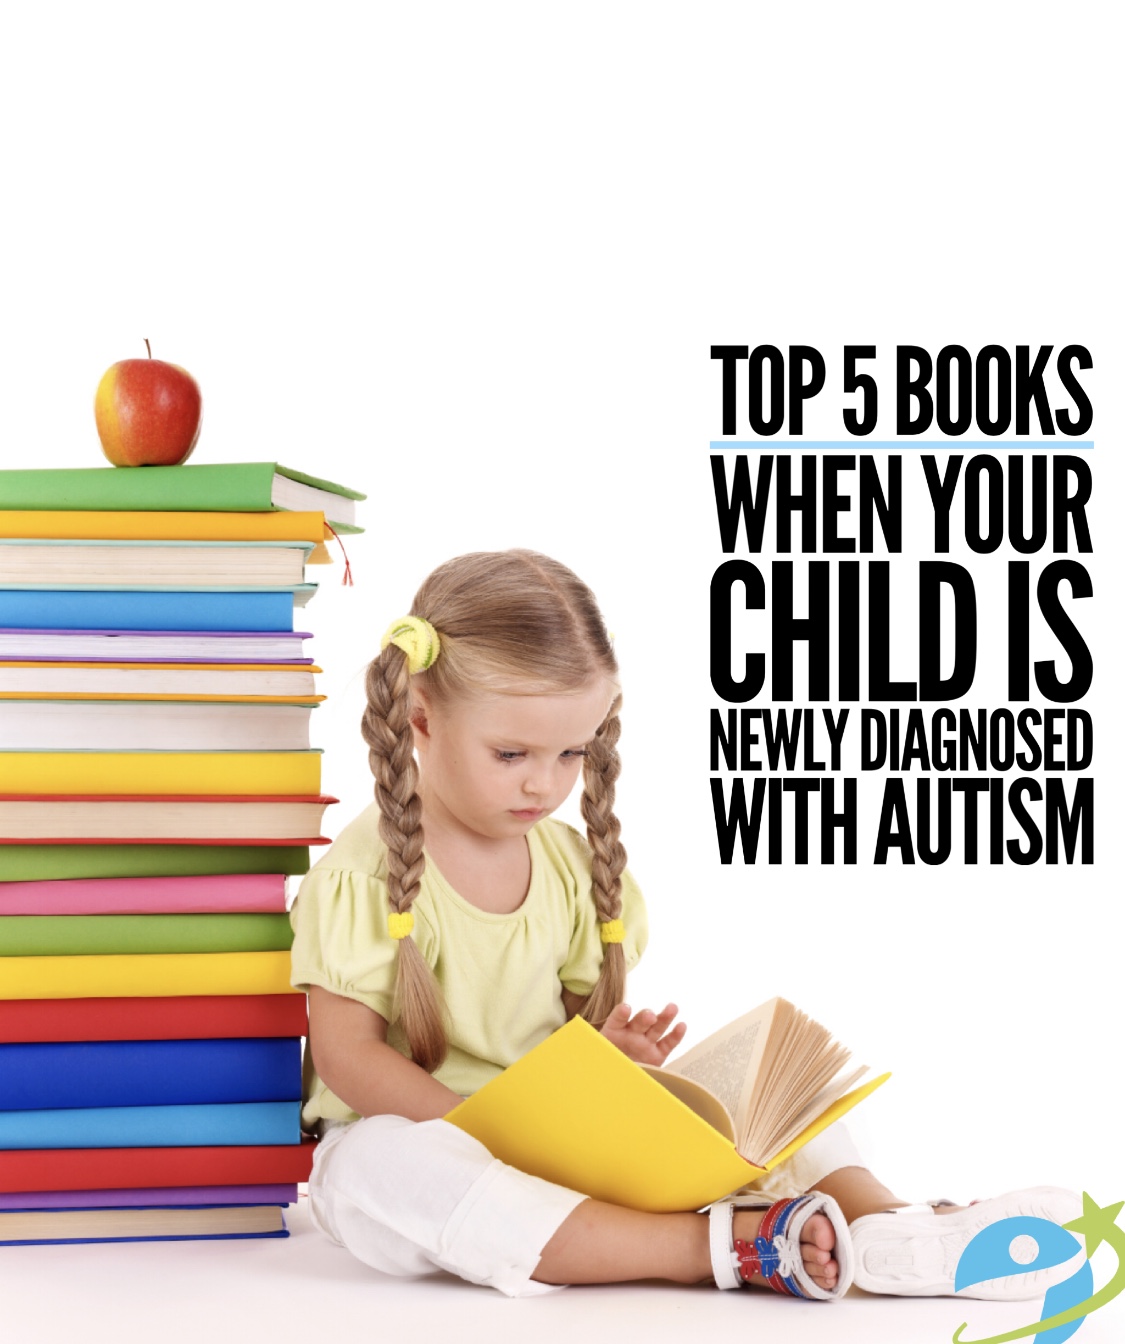 Top 5 Books for When Your Child is Diagnosed with Autism